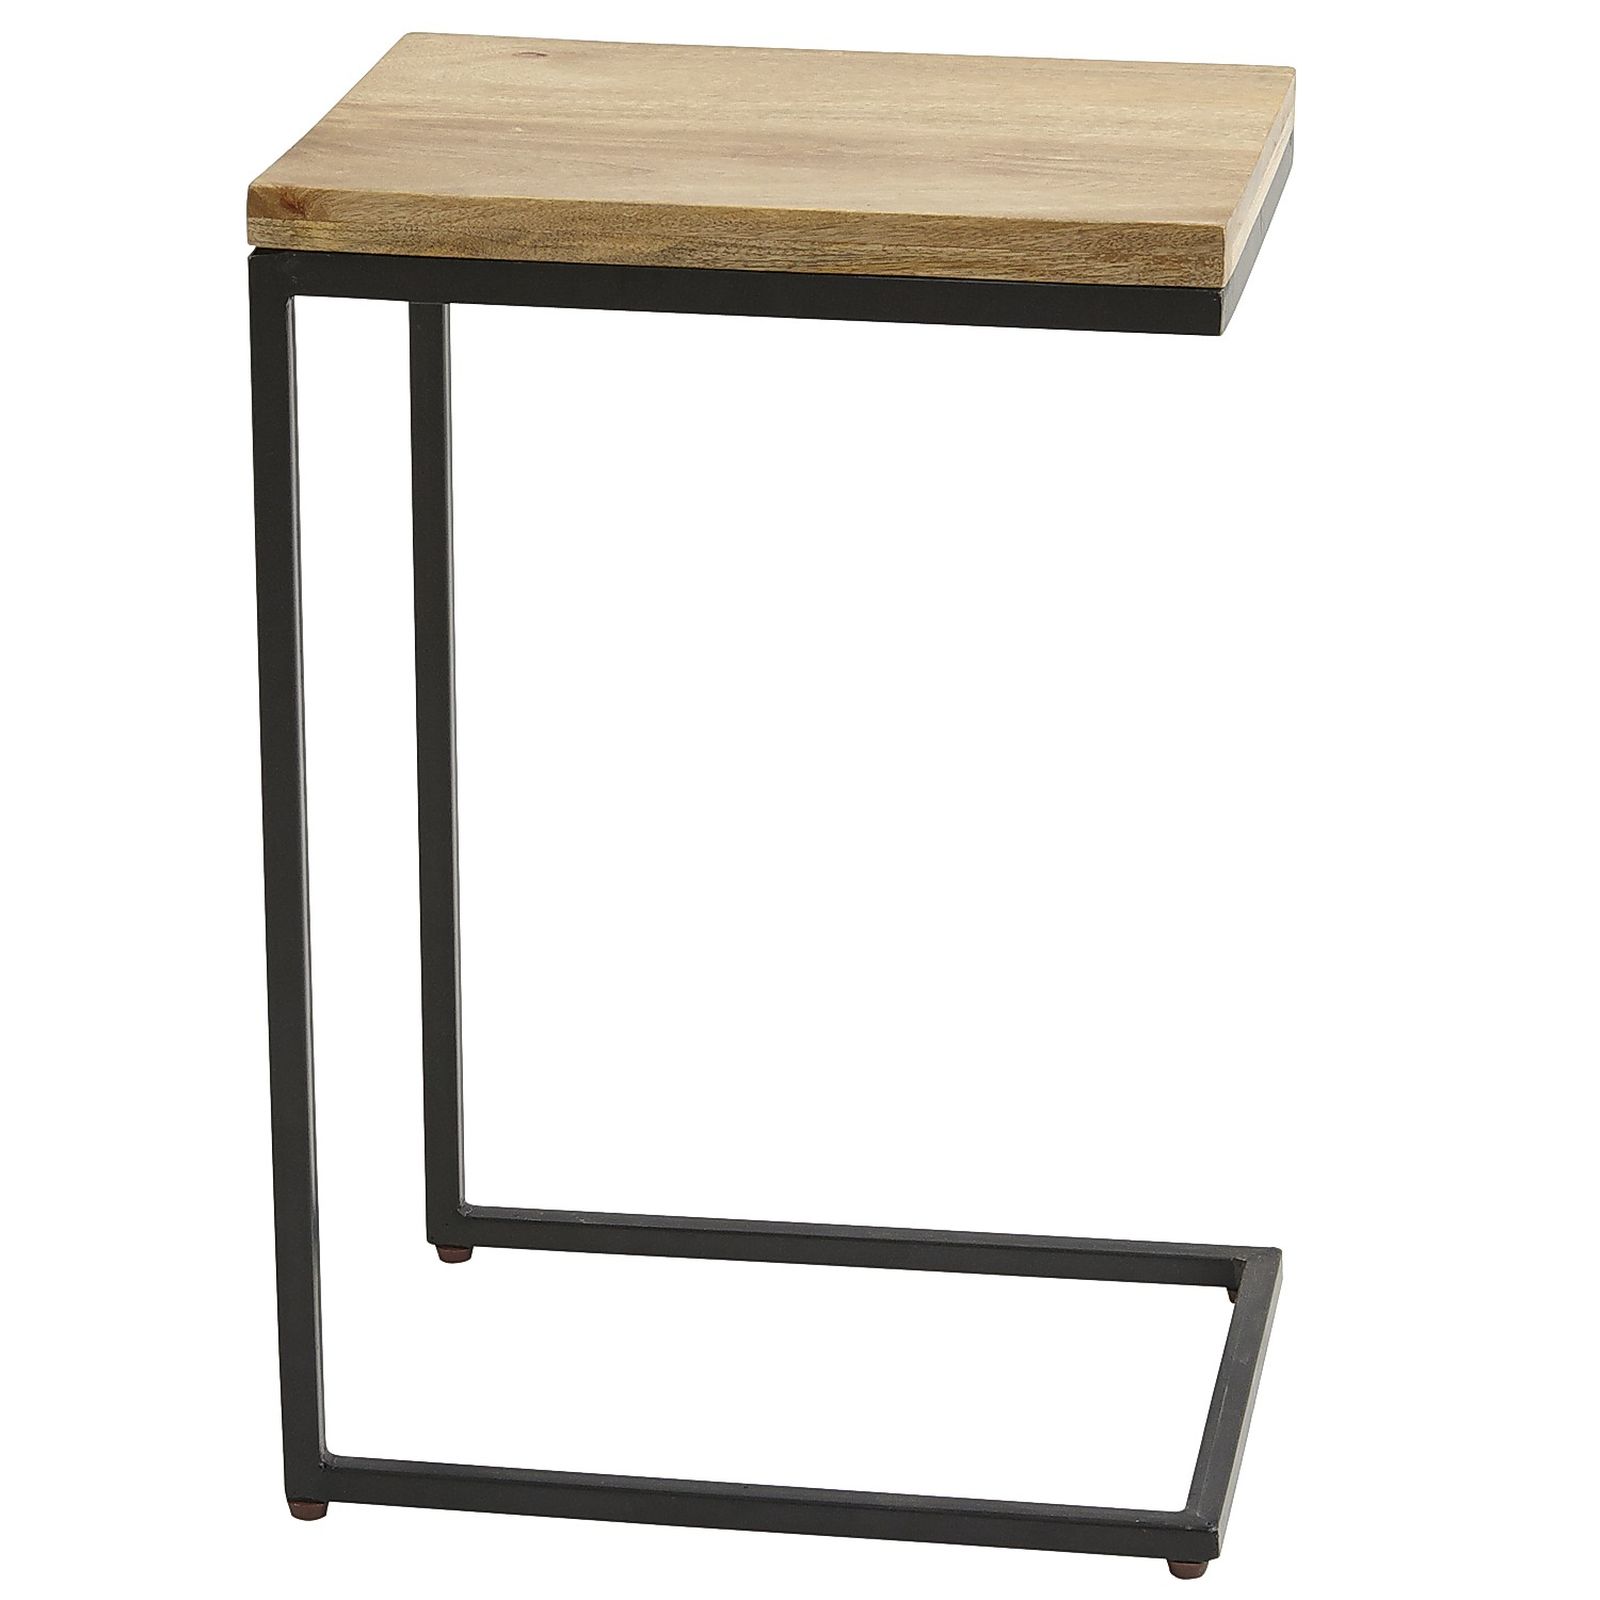 sofa table affordable pier one ideas imports side with laptop storage accent end tables safes that look like furniture broyhill usb pie shaped target console pallet patio black